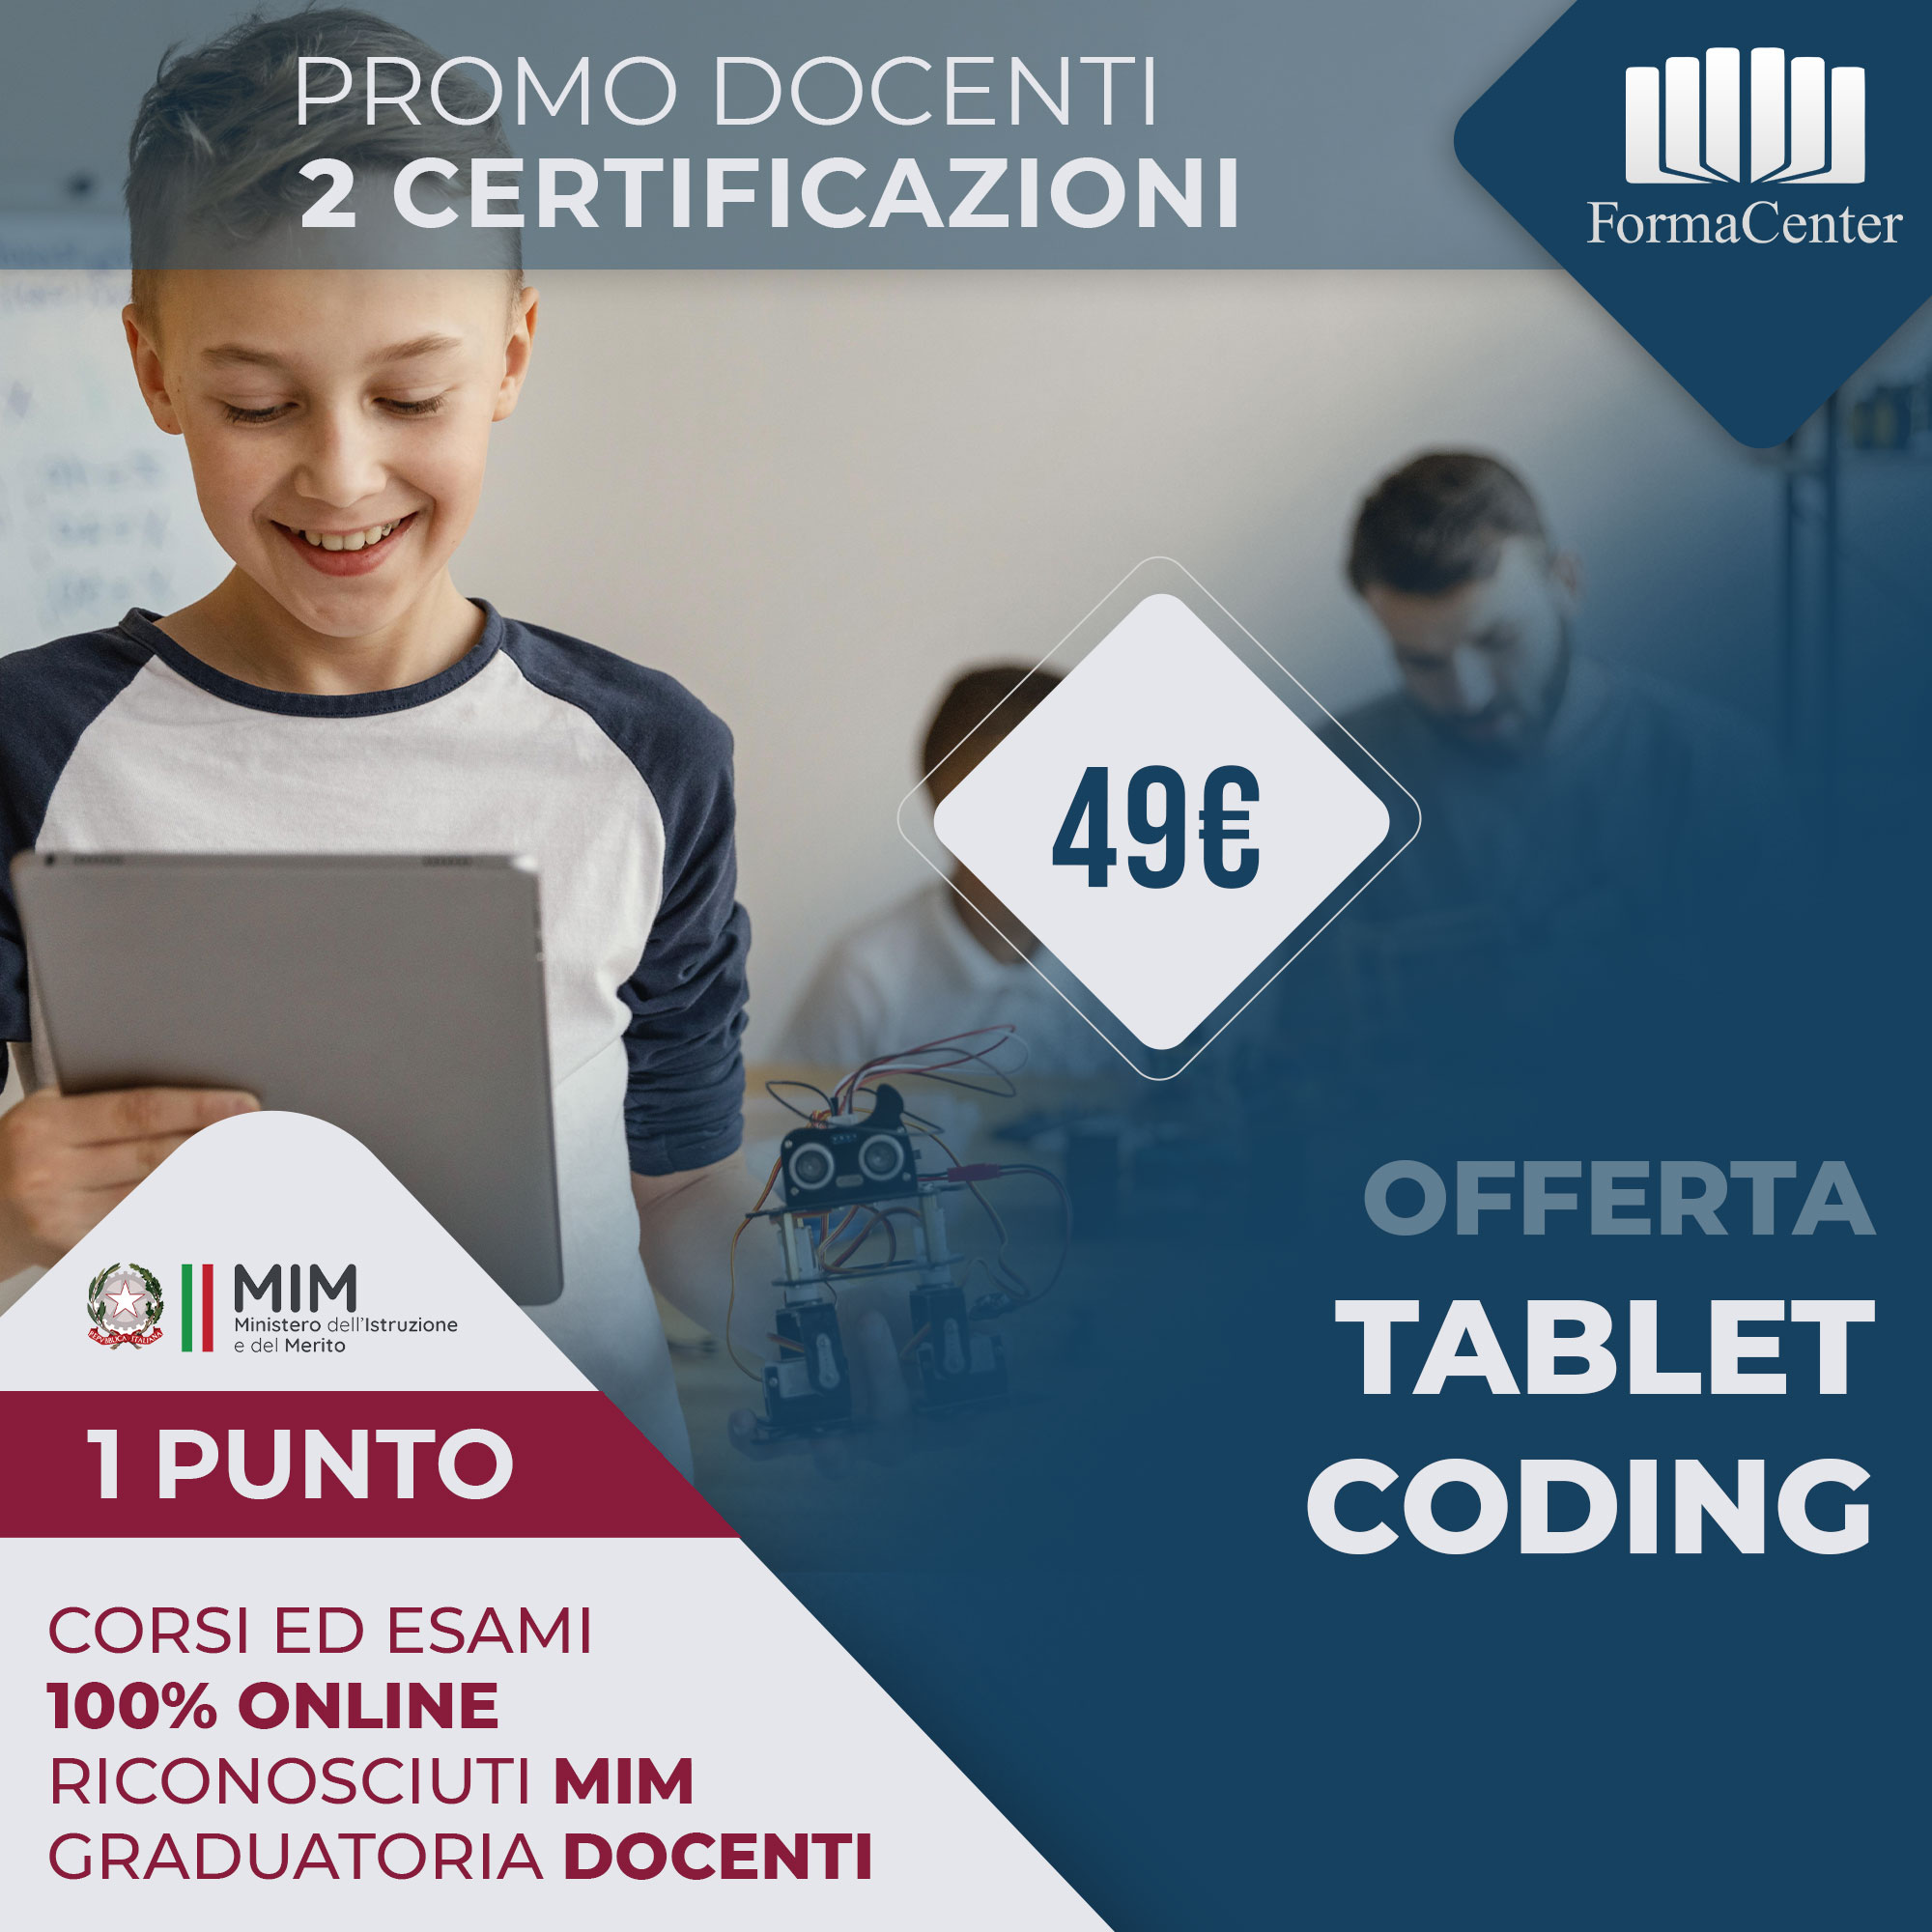 PROMO: TABLET + CODING